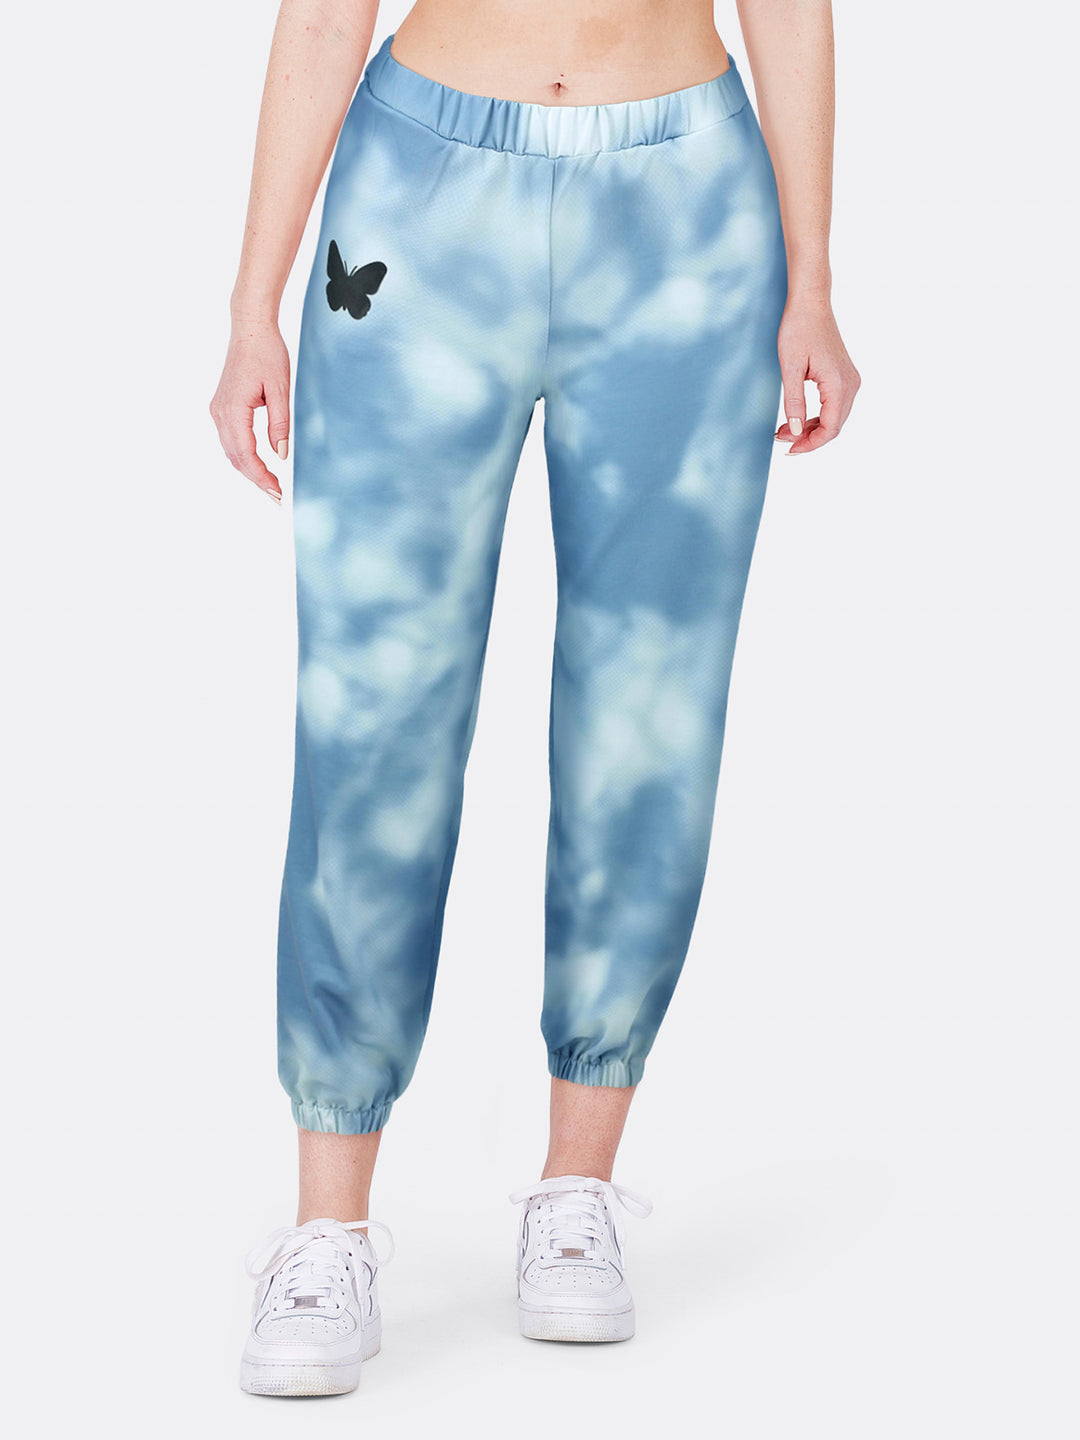 Tie-Dye High Waist Jogging Trousers Butterfly Printed Blue Front Close | Jolovies